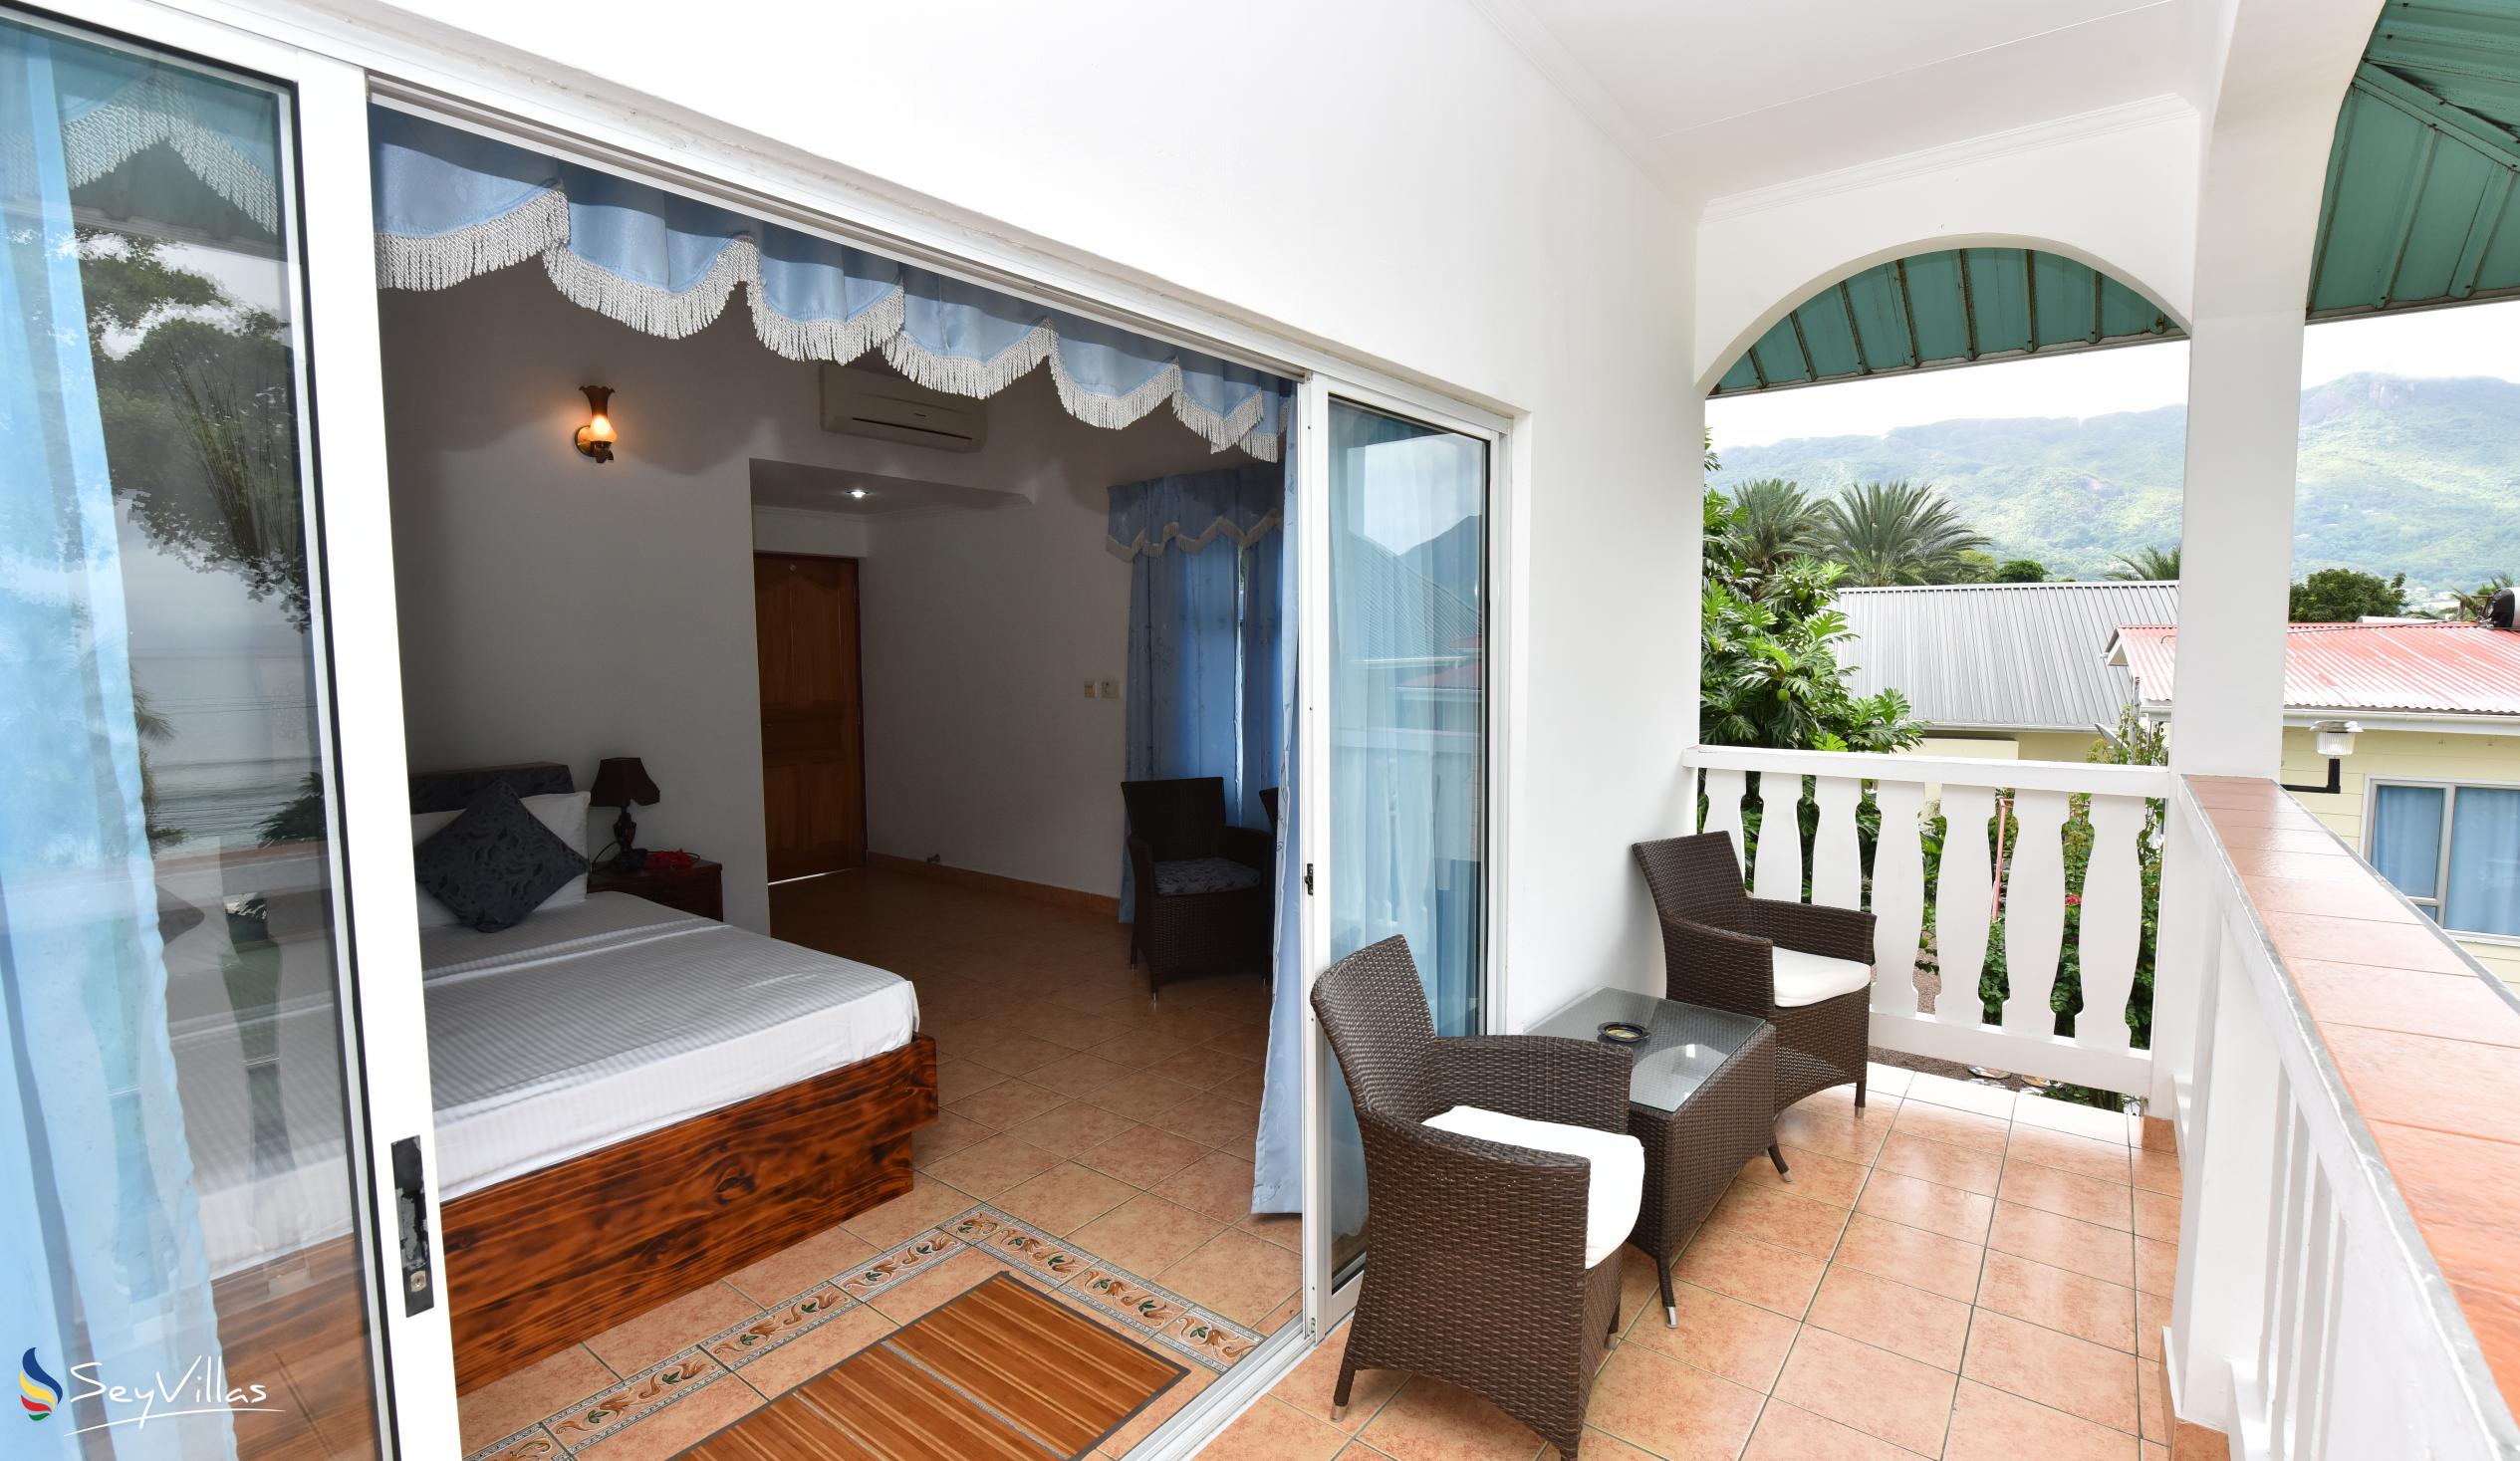 Photo 12: The Diver's Lodge - Standard Room (First Floor) - Mahé (Seychelles)